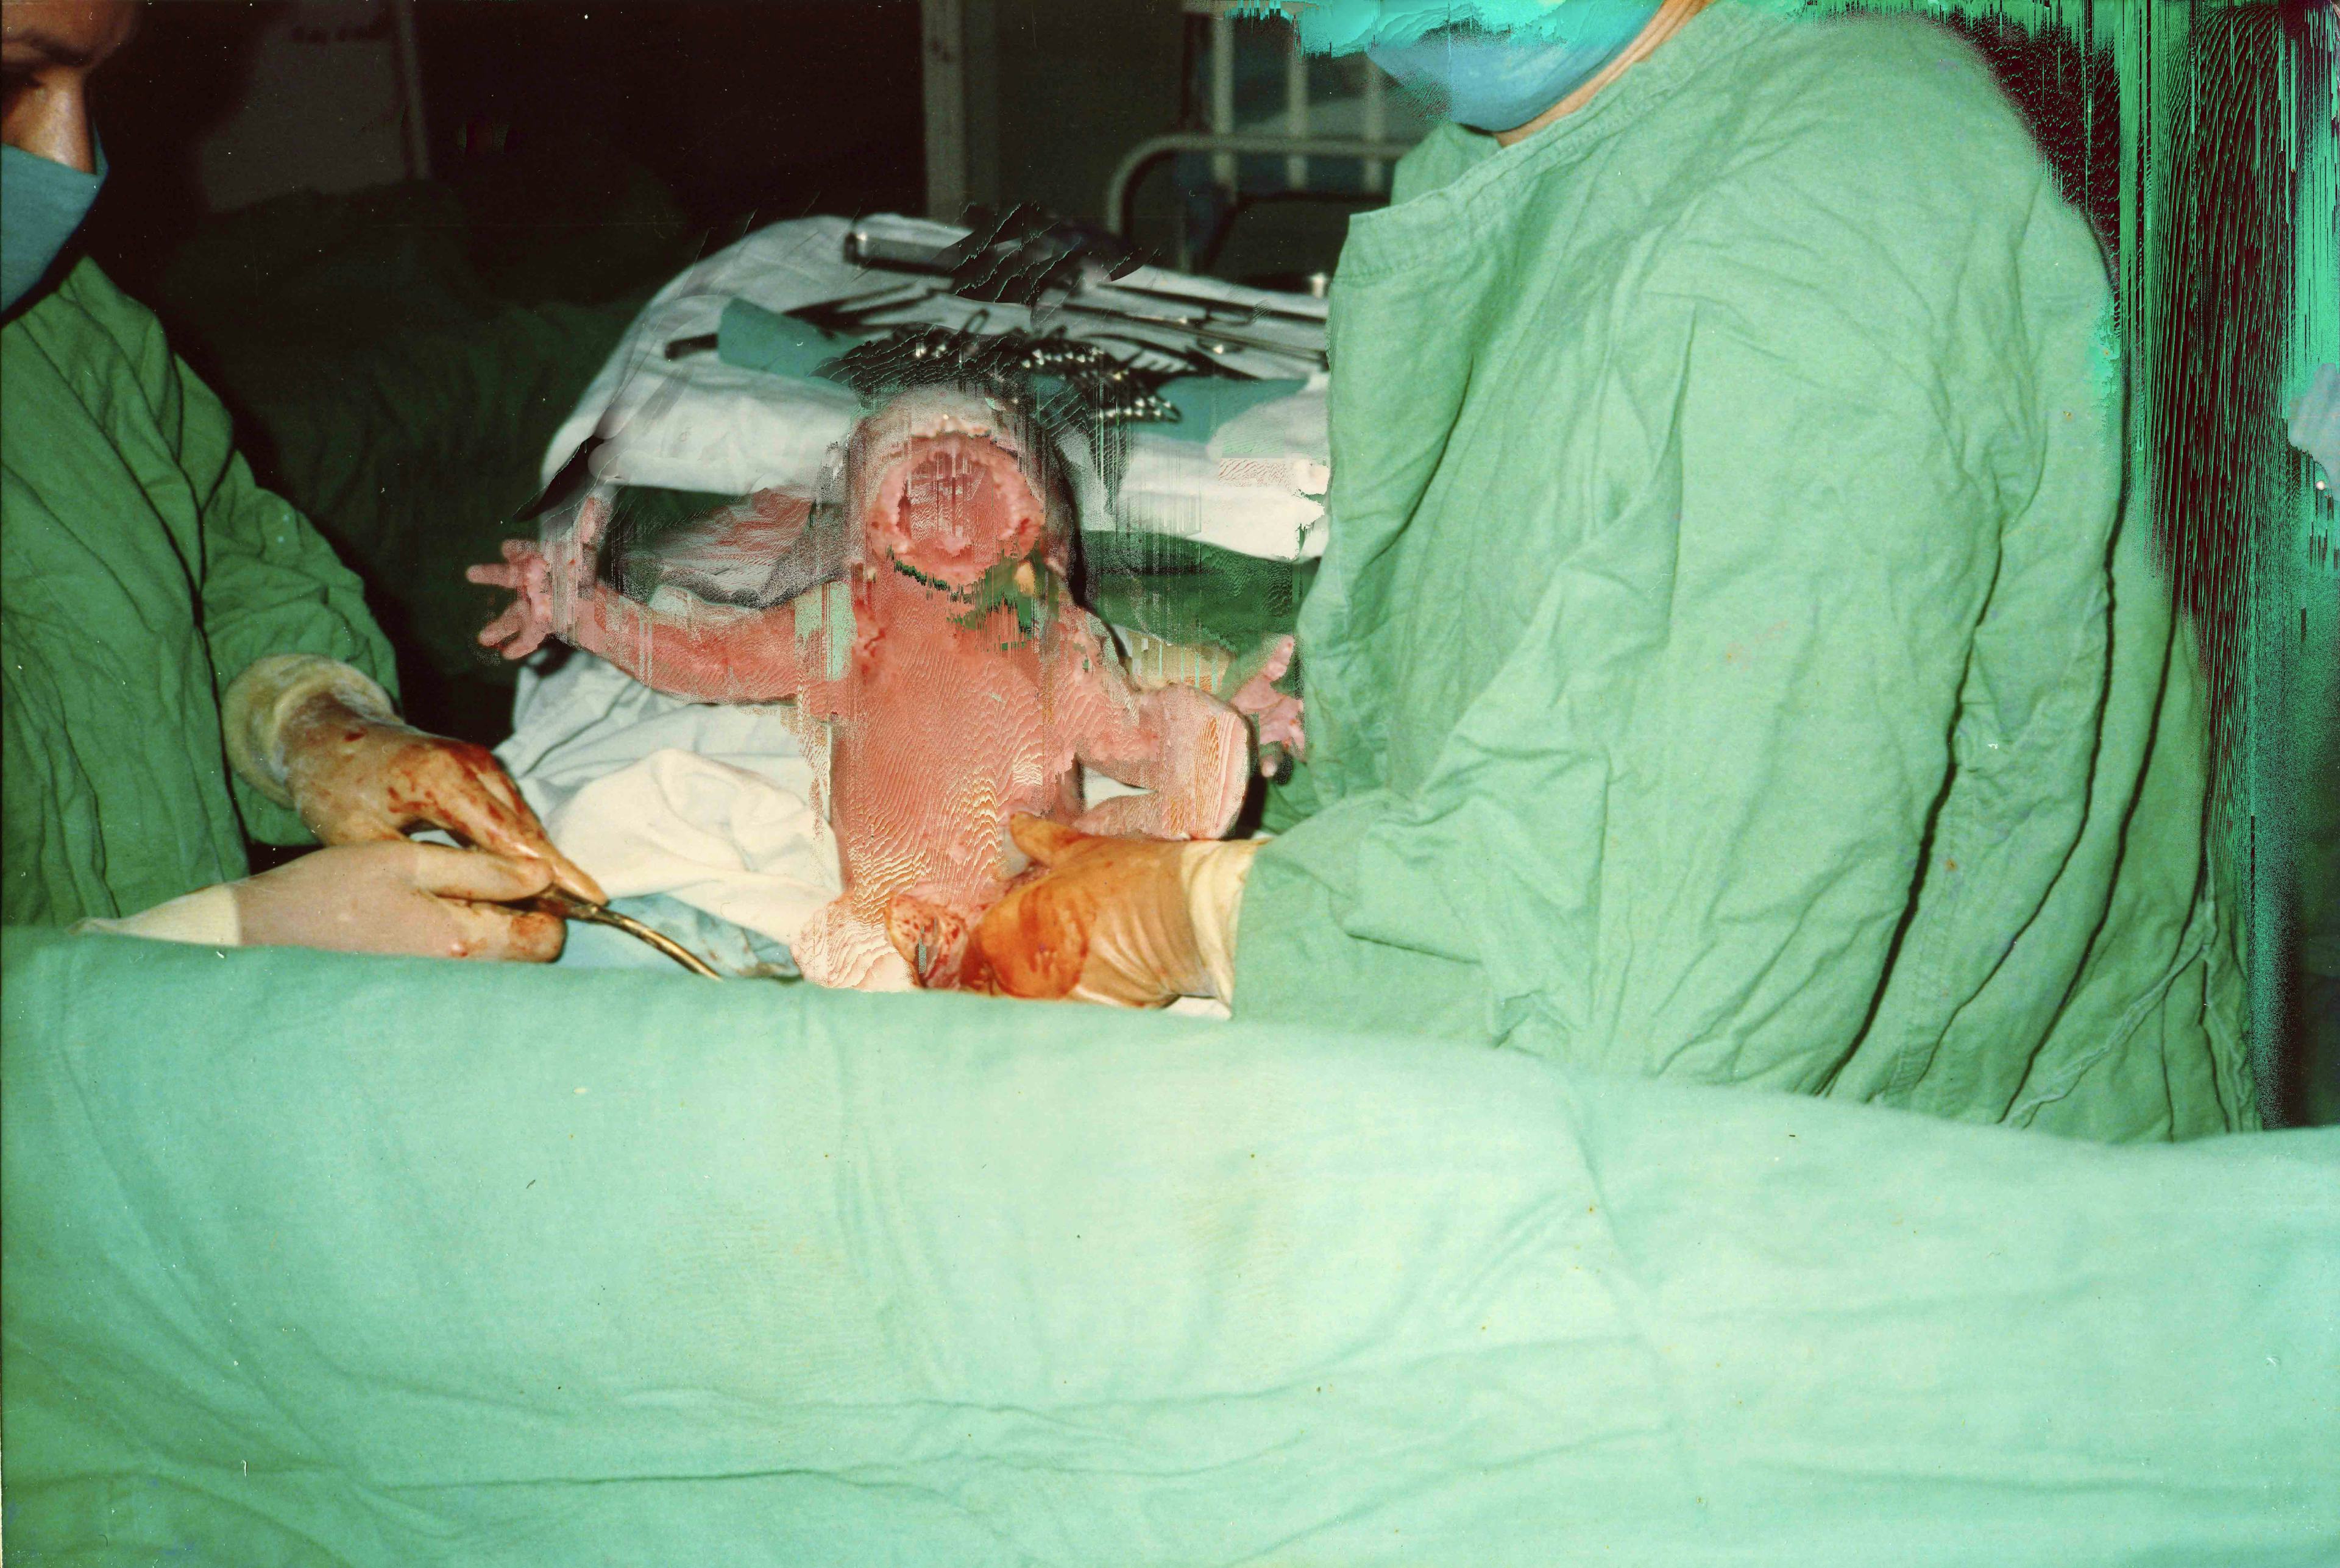 Archival image of the artist's birth, showing him as a baby being hold by nurses in green scrubs. The pixels are manipulated and appear to wipe out the baby's face© Cristóbal Ascencio Ramos